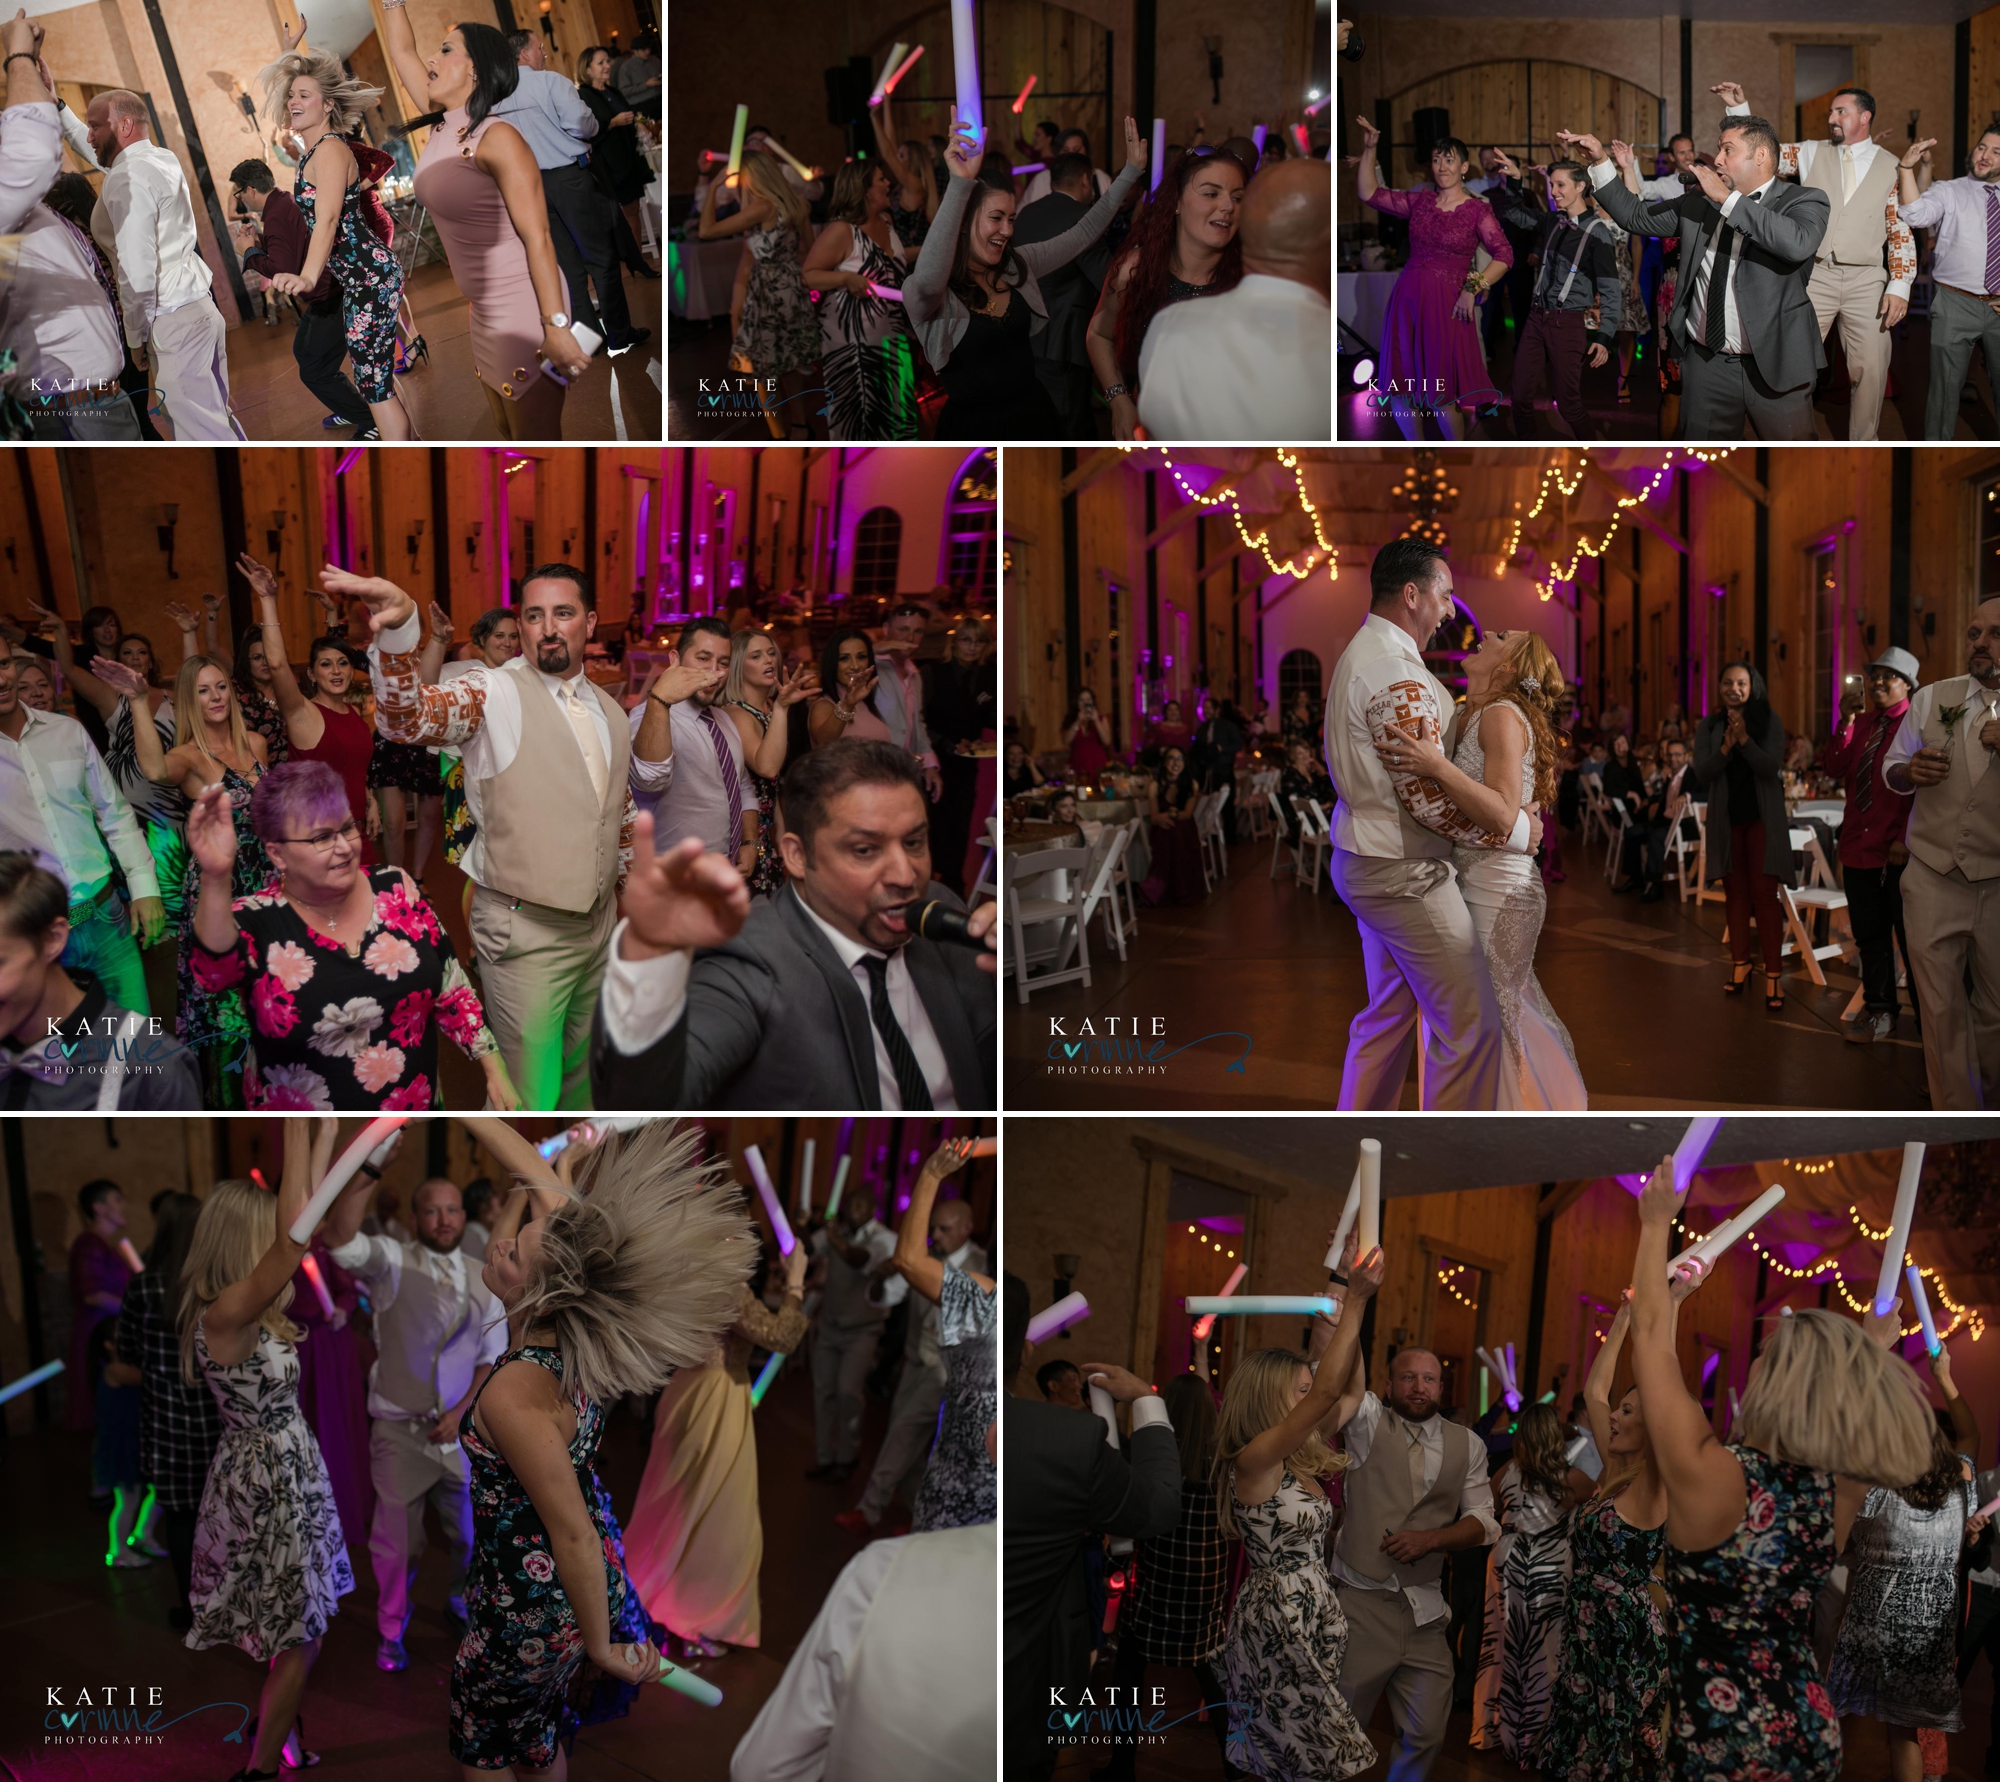 wedding couple dances with guests at reception